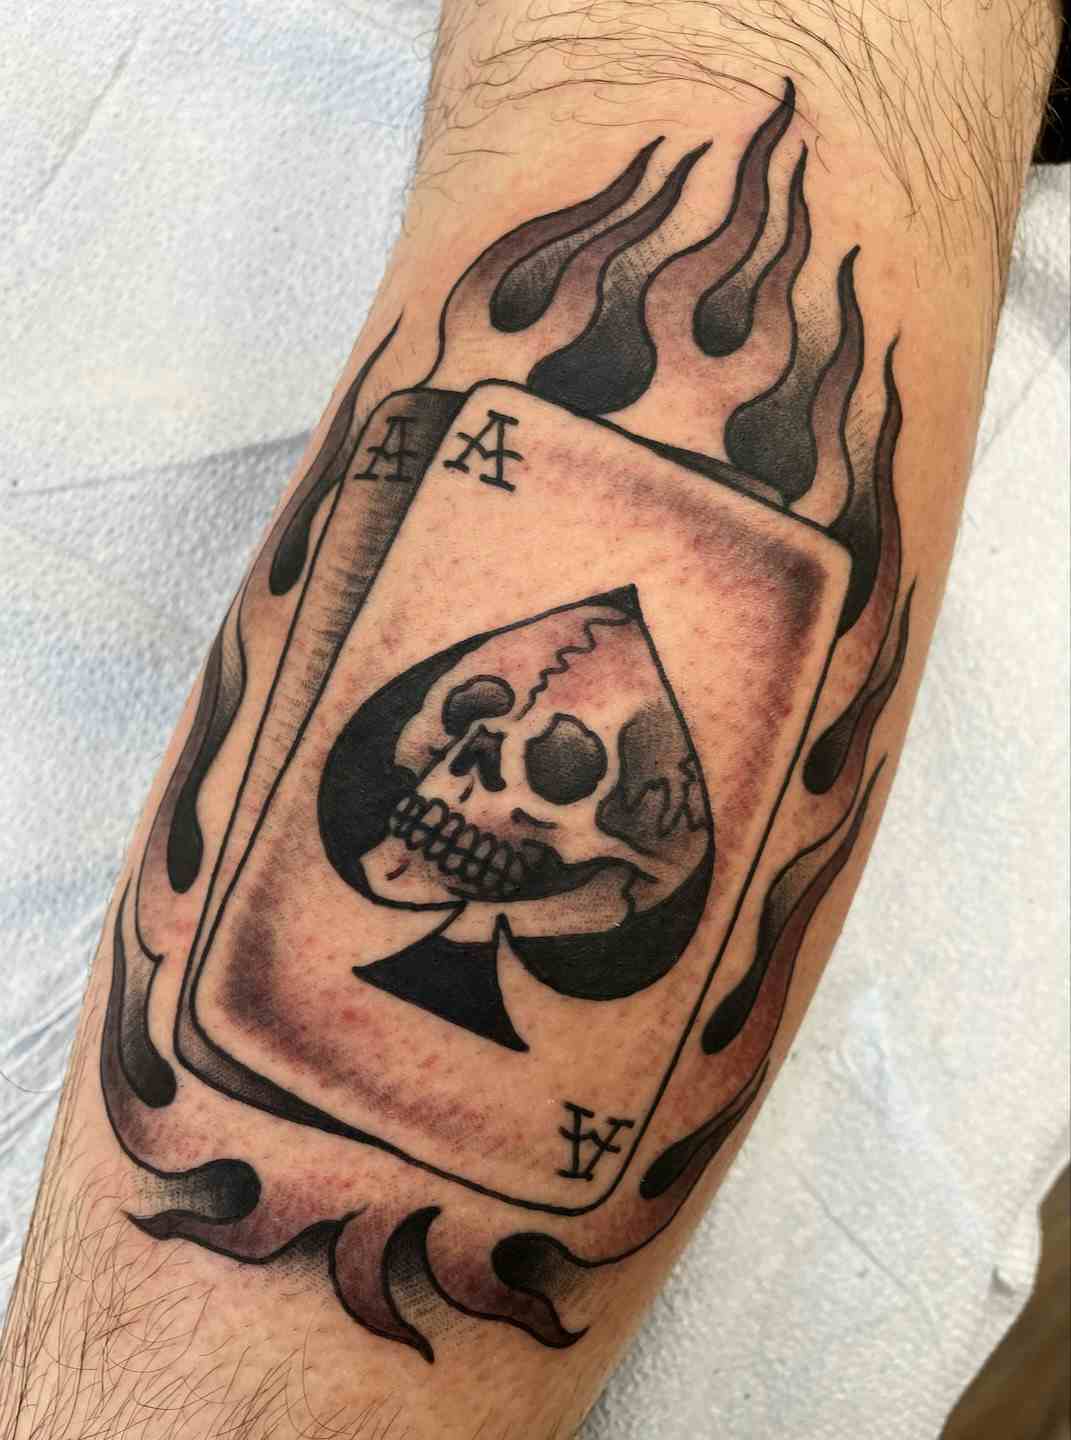 Pair of aces tattoo